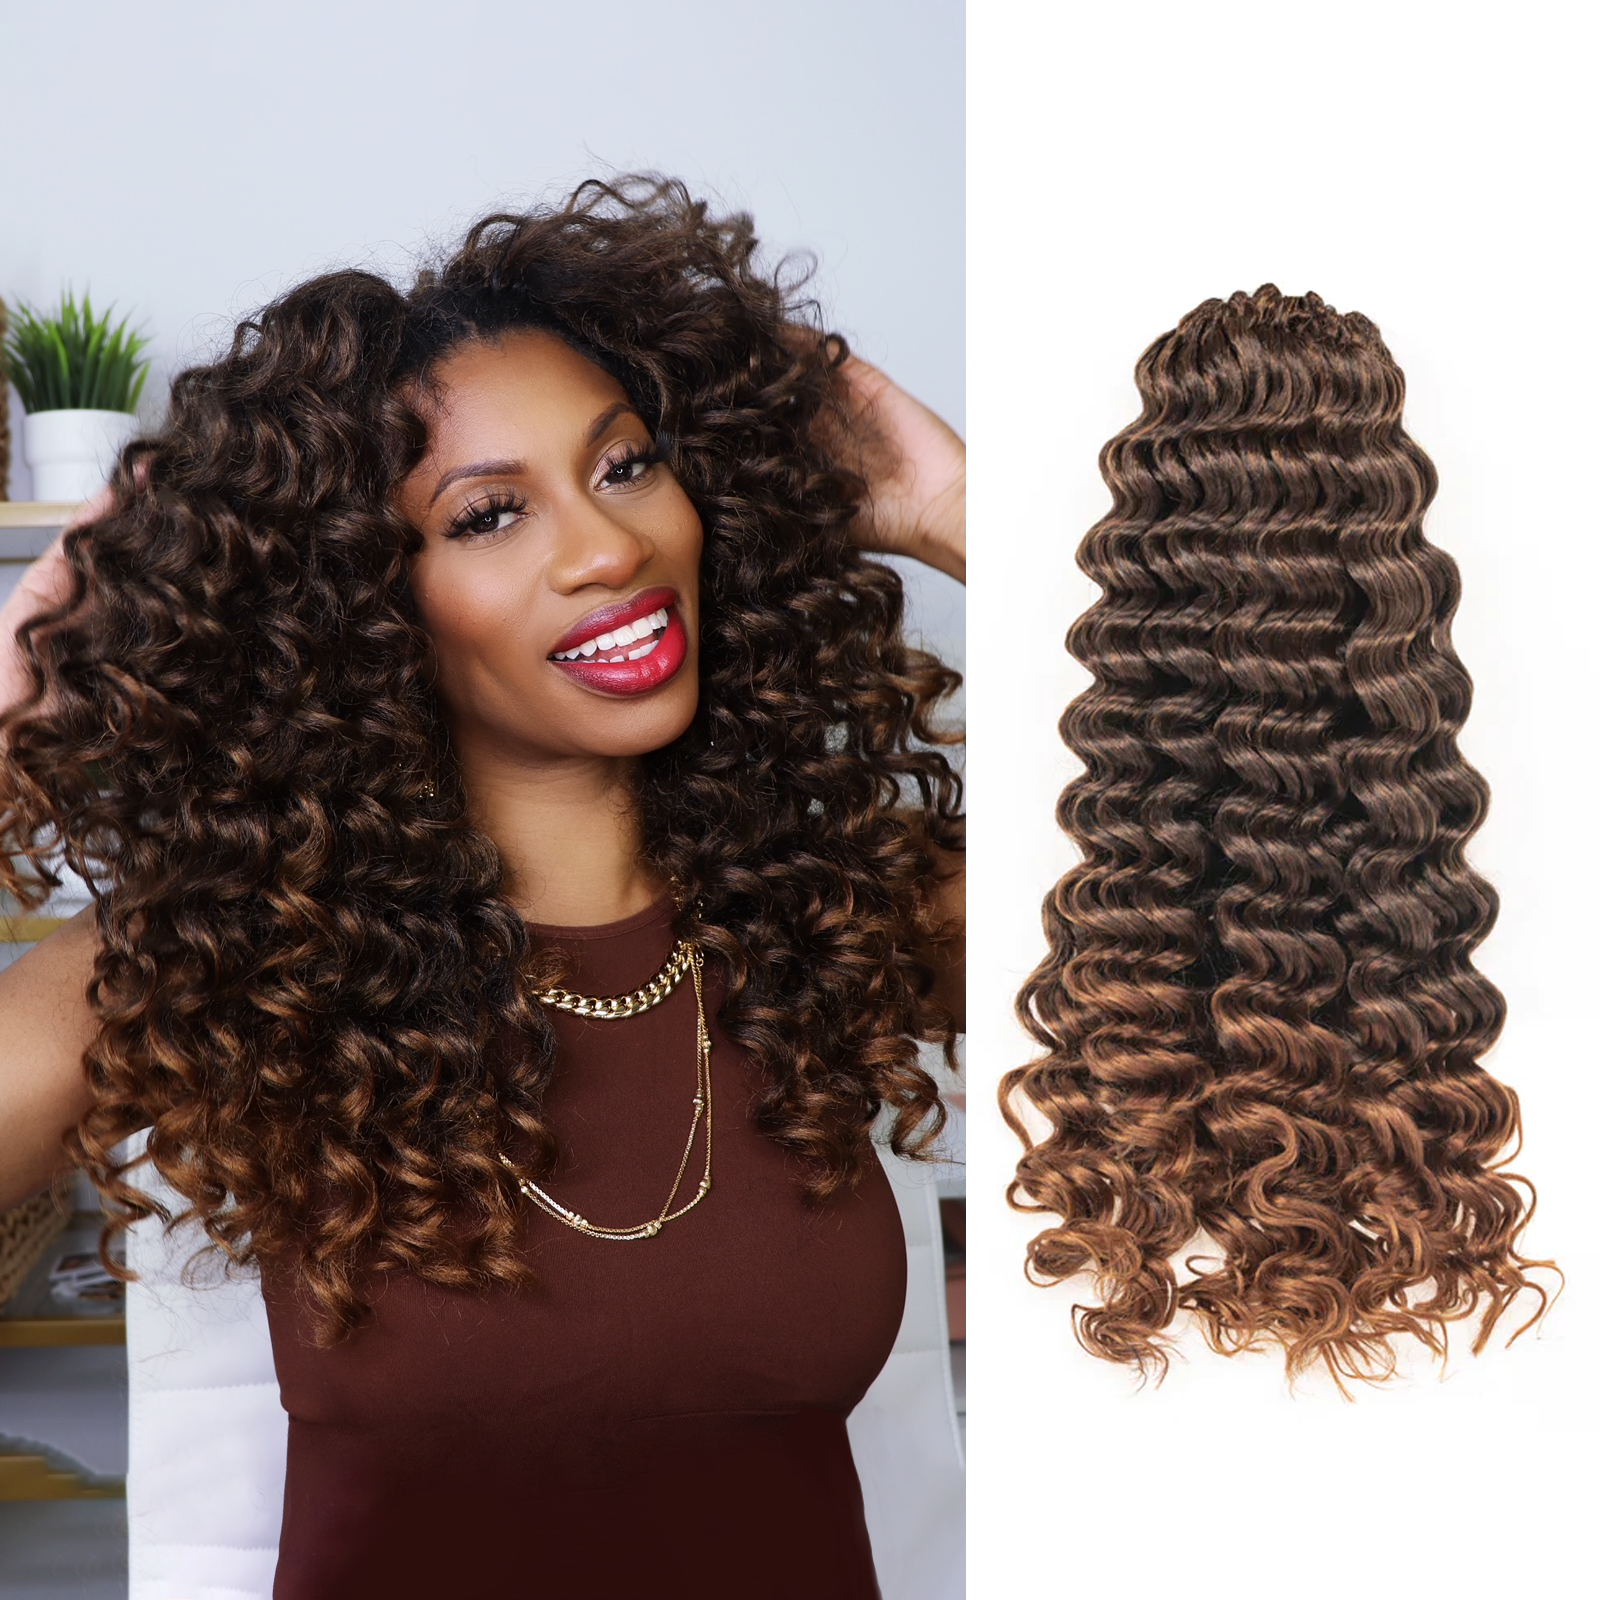 Clearance |  Ocean Wave Crochet Hair 9-30 Inch 8 Packs | Synthetic Wave Curly Hair Extensions